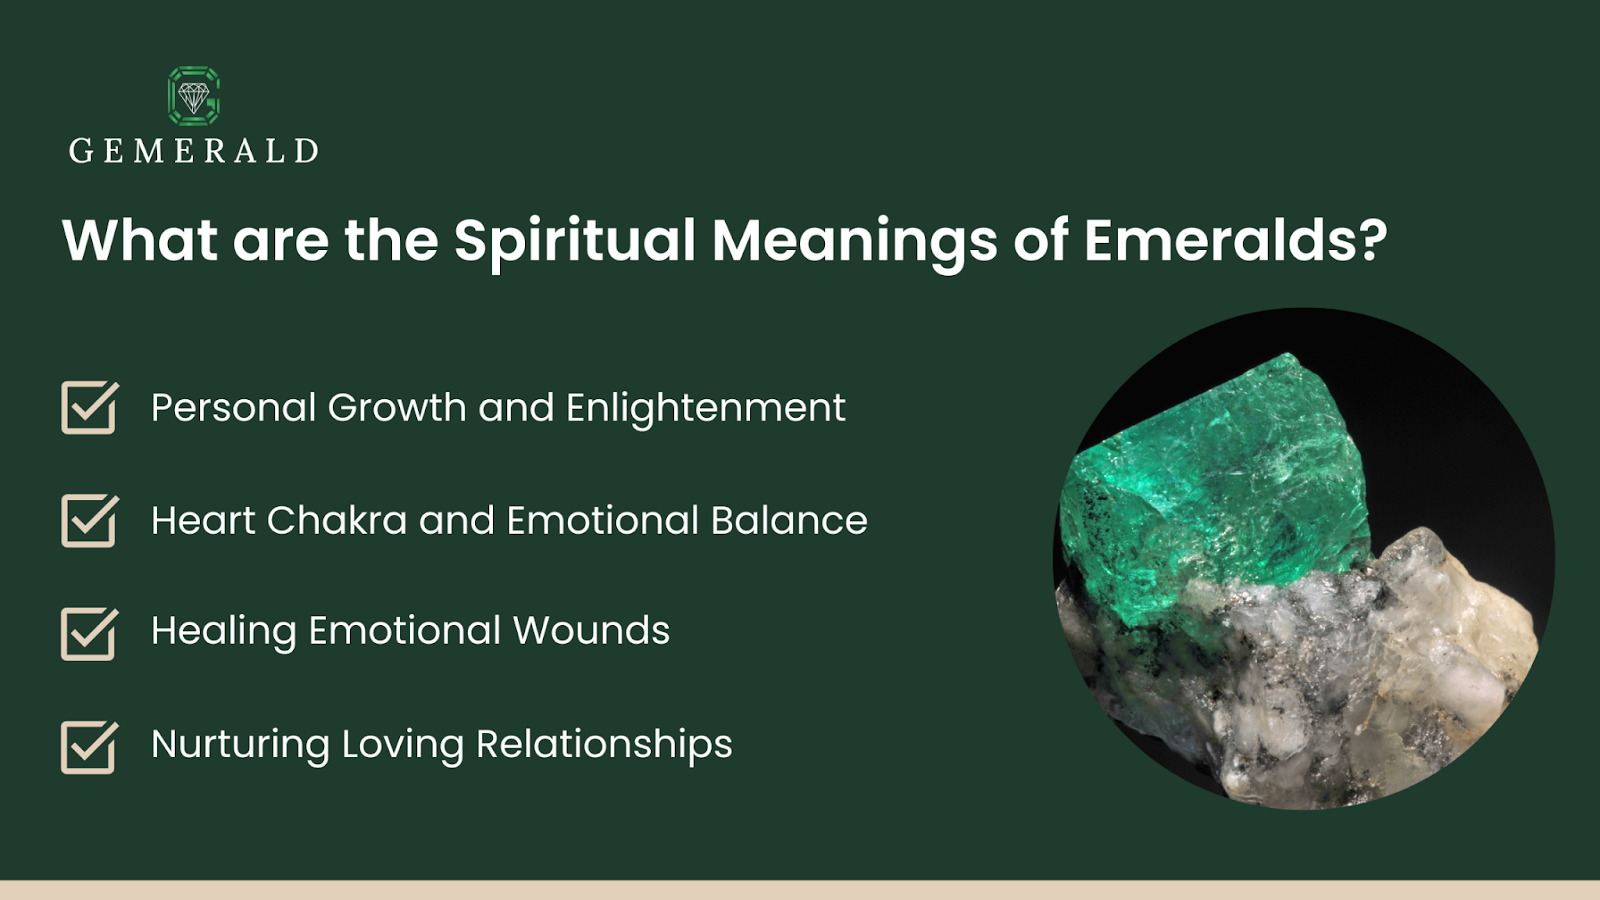 What are the Spiritual Meanings of Emeralds?